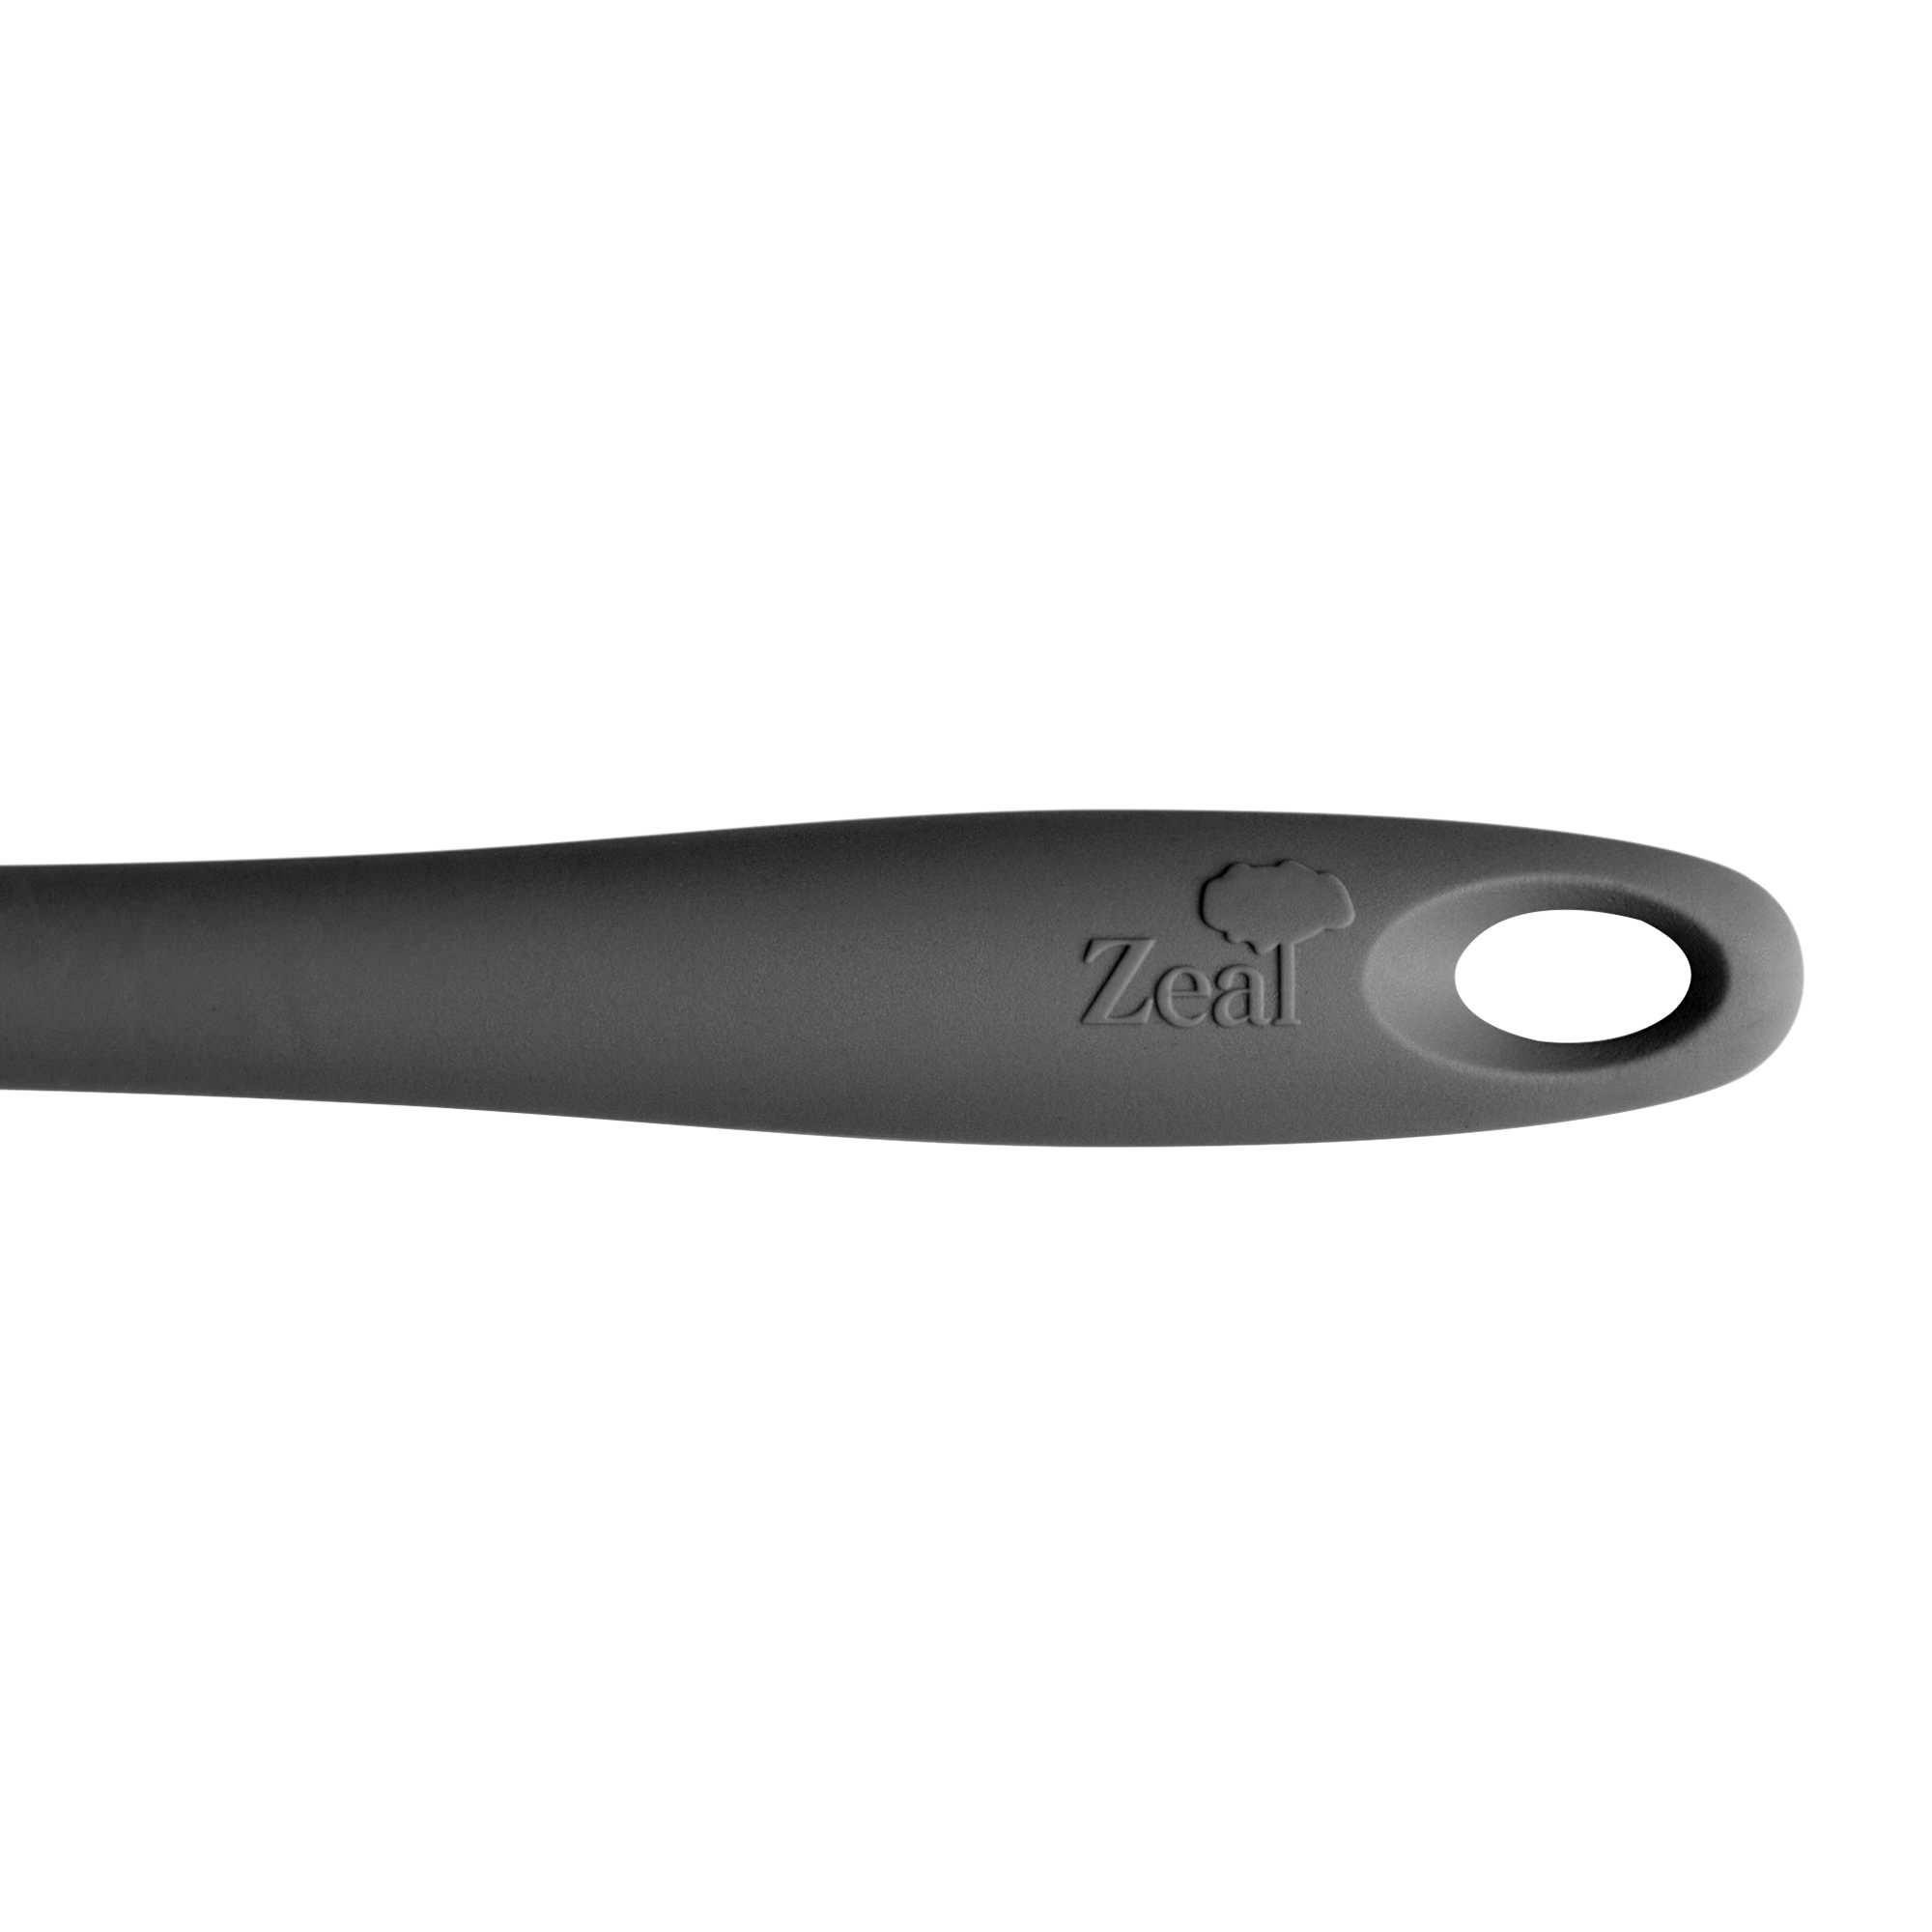 Zeal Silicone Spatula Spoon Charcoal Image 4